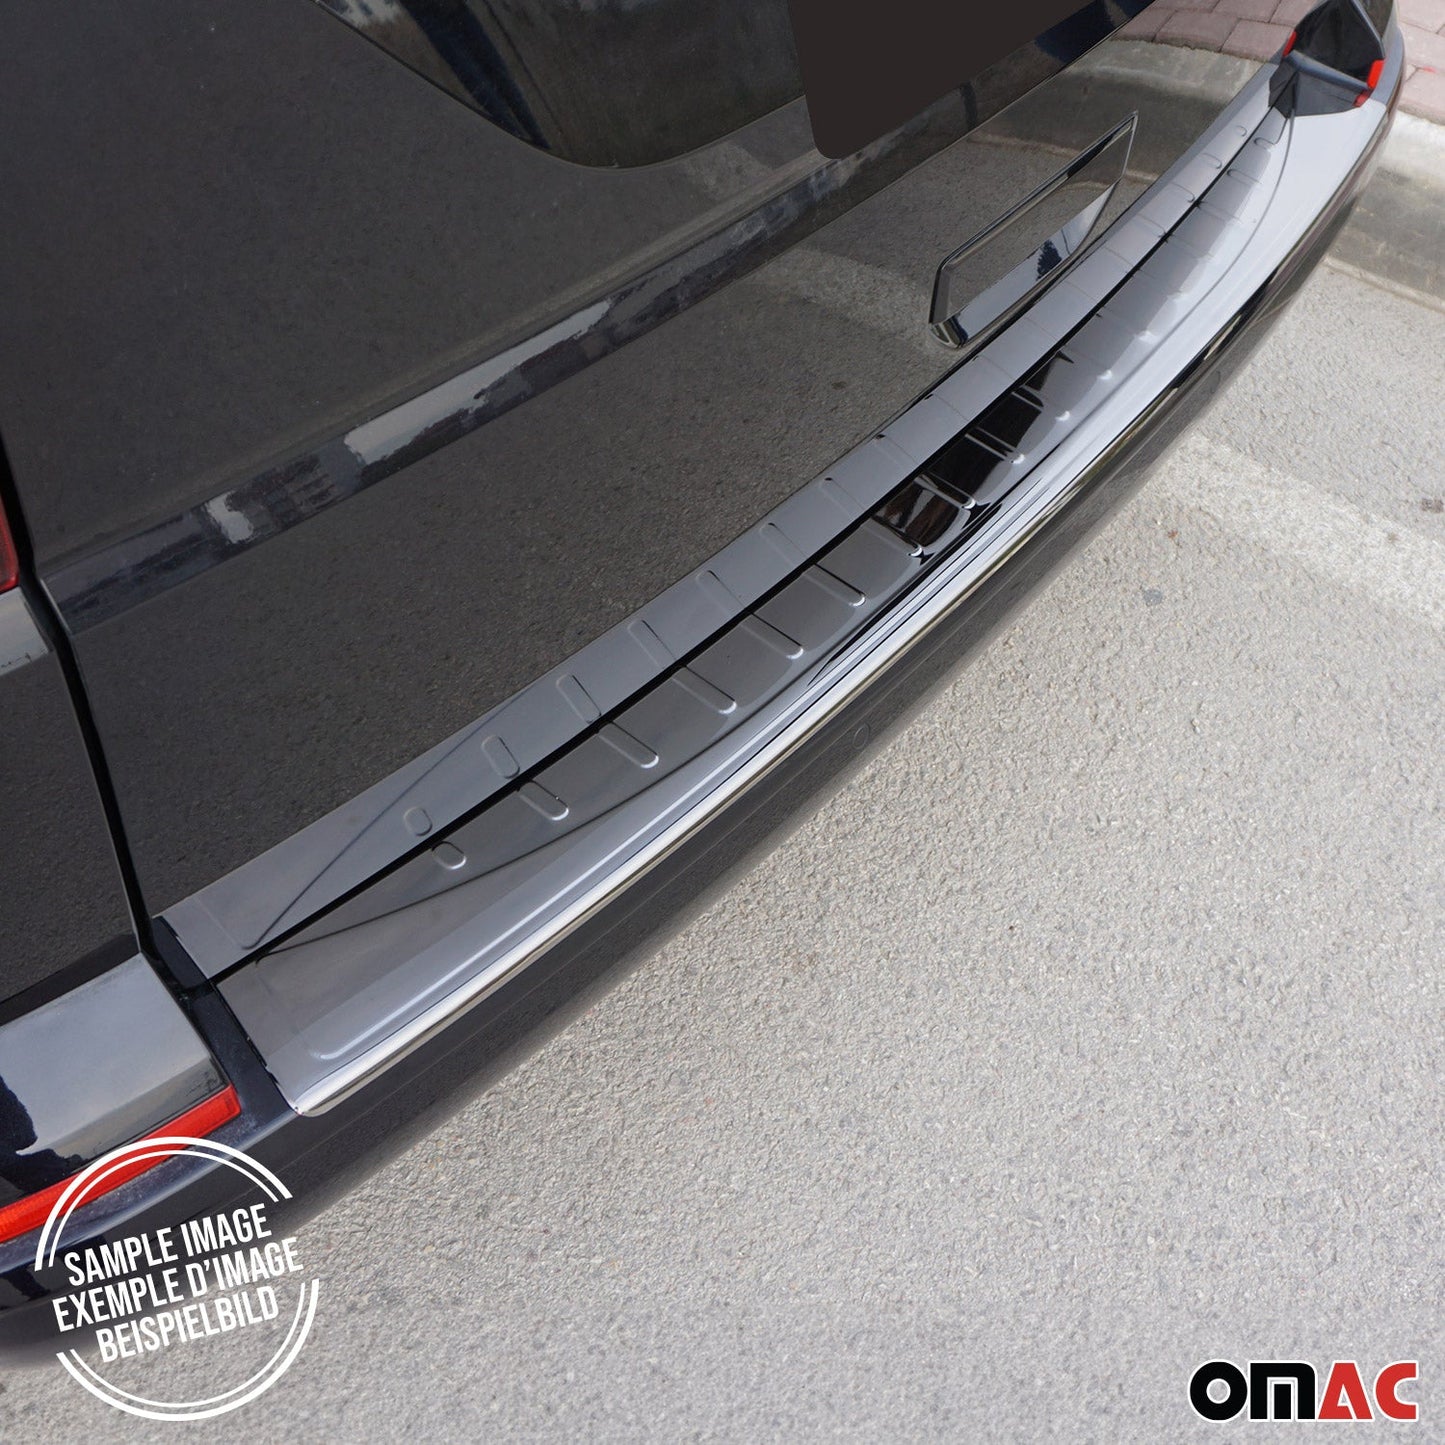 OMAC Rear Bumper Sill Cover Protector for Dodge Journey 2009-2020 Steel Brushed Dark 2528093B